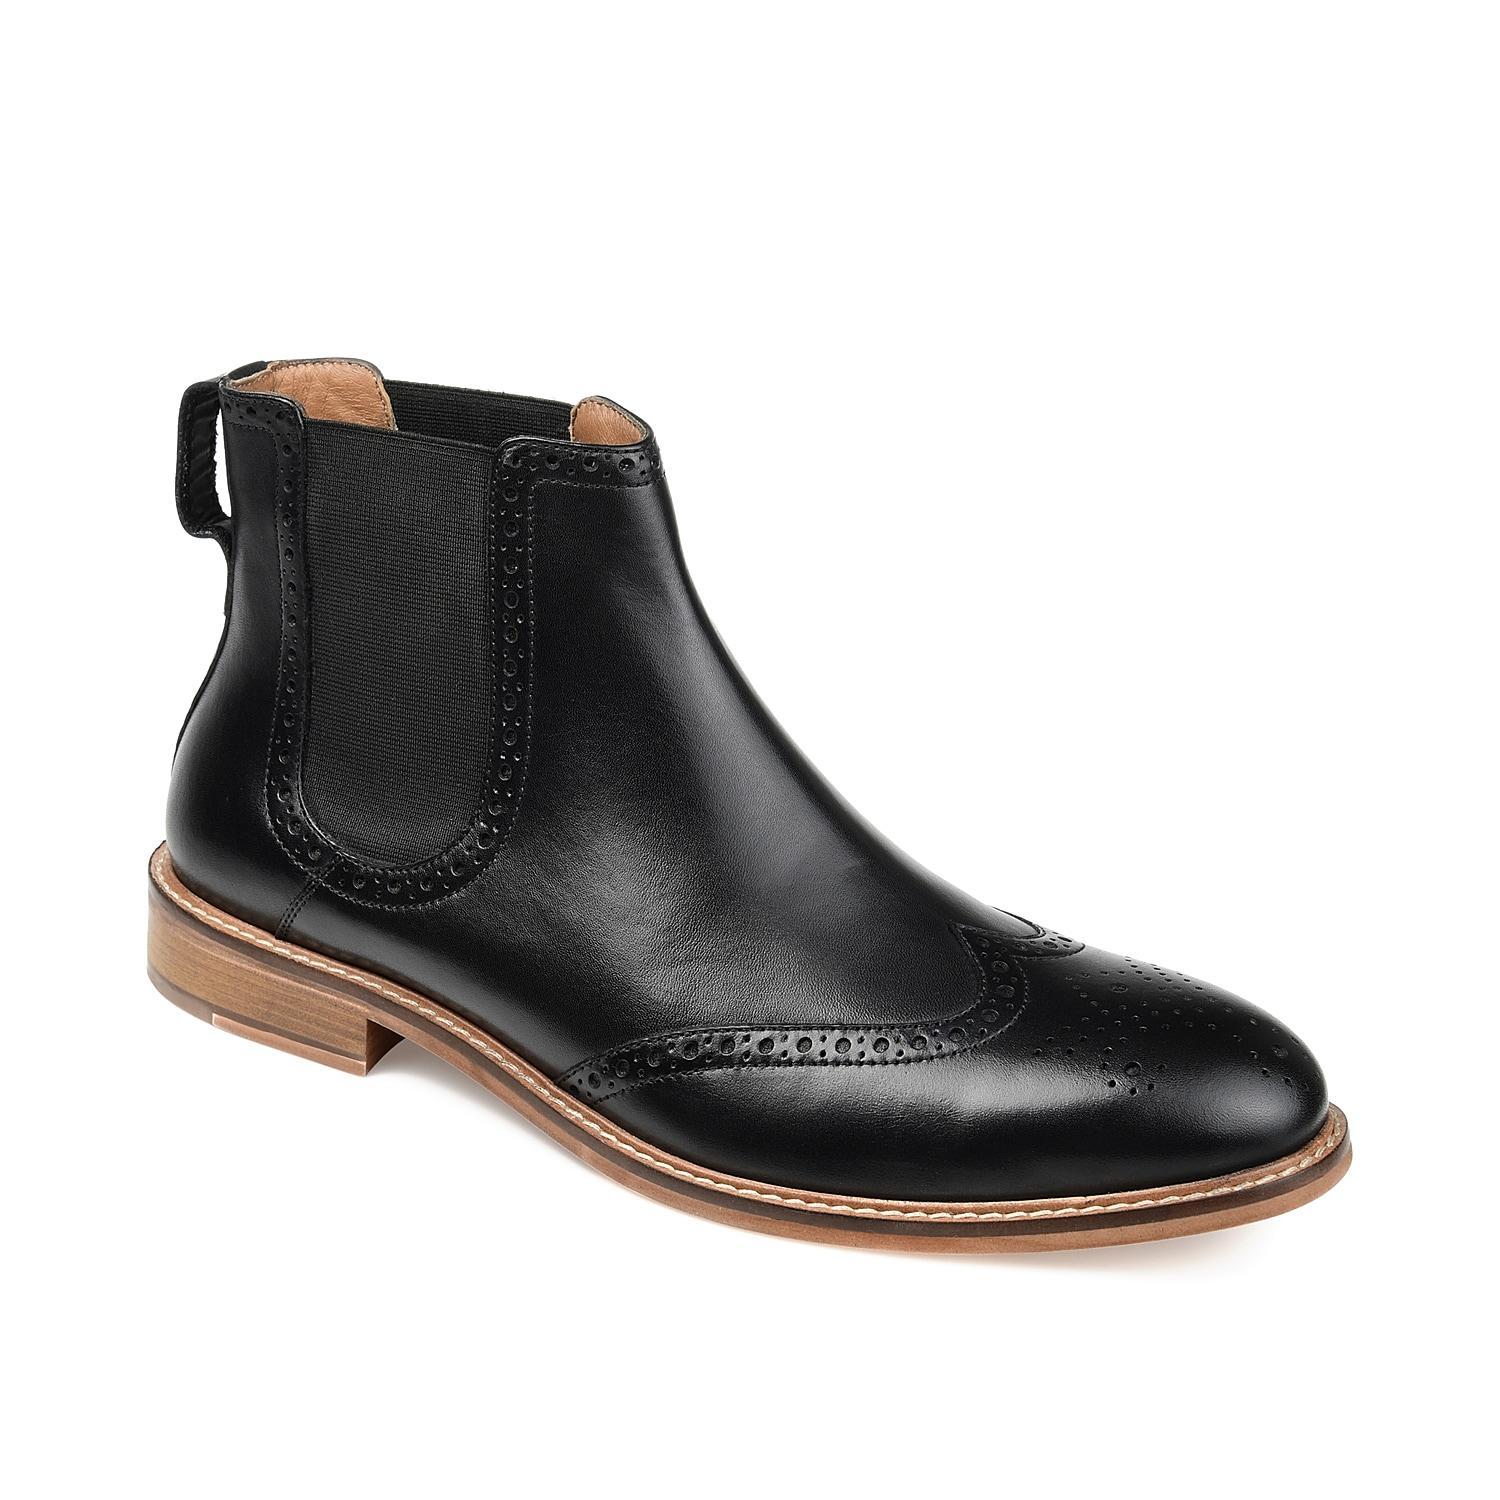 Thomas & Vine Watson Wing Tip Chelsea Boot Men's Shoes Product Image